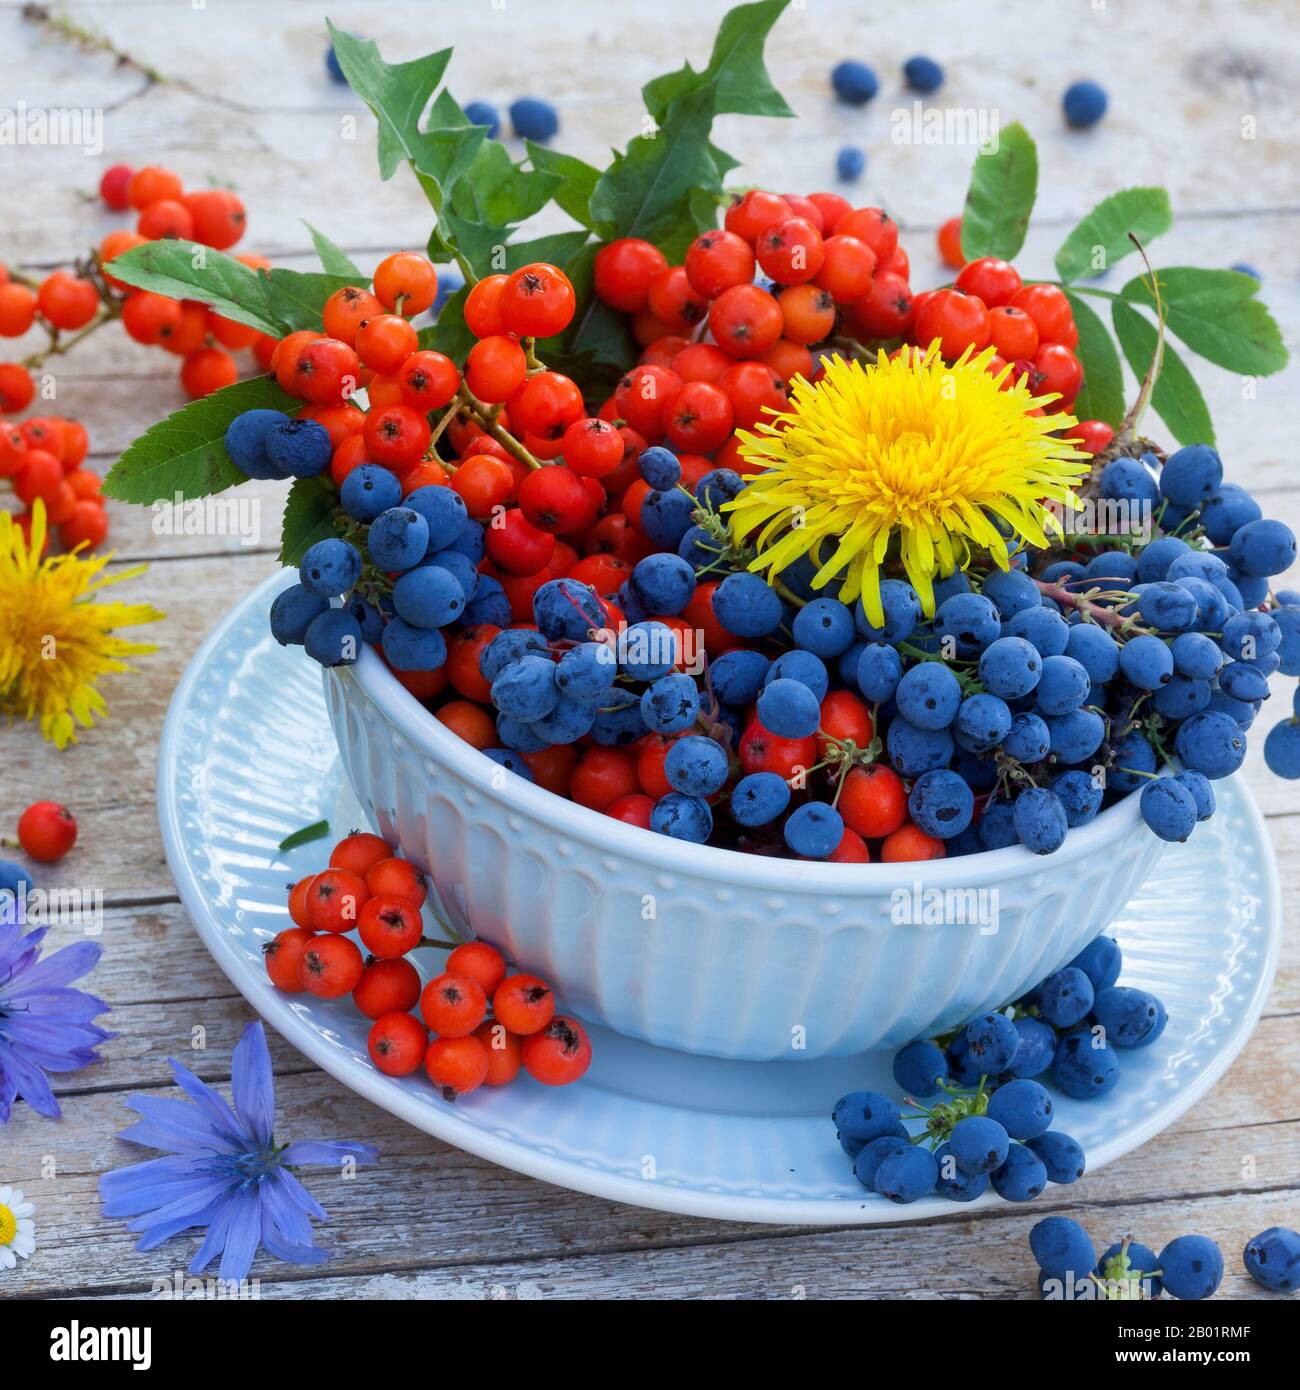 bowl with mountain grapes and rowan tree berries, decoratet with flowers of dandelion and blue sailors, Germany Stock Photo